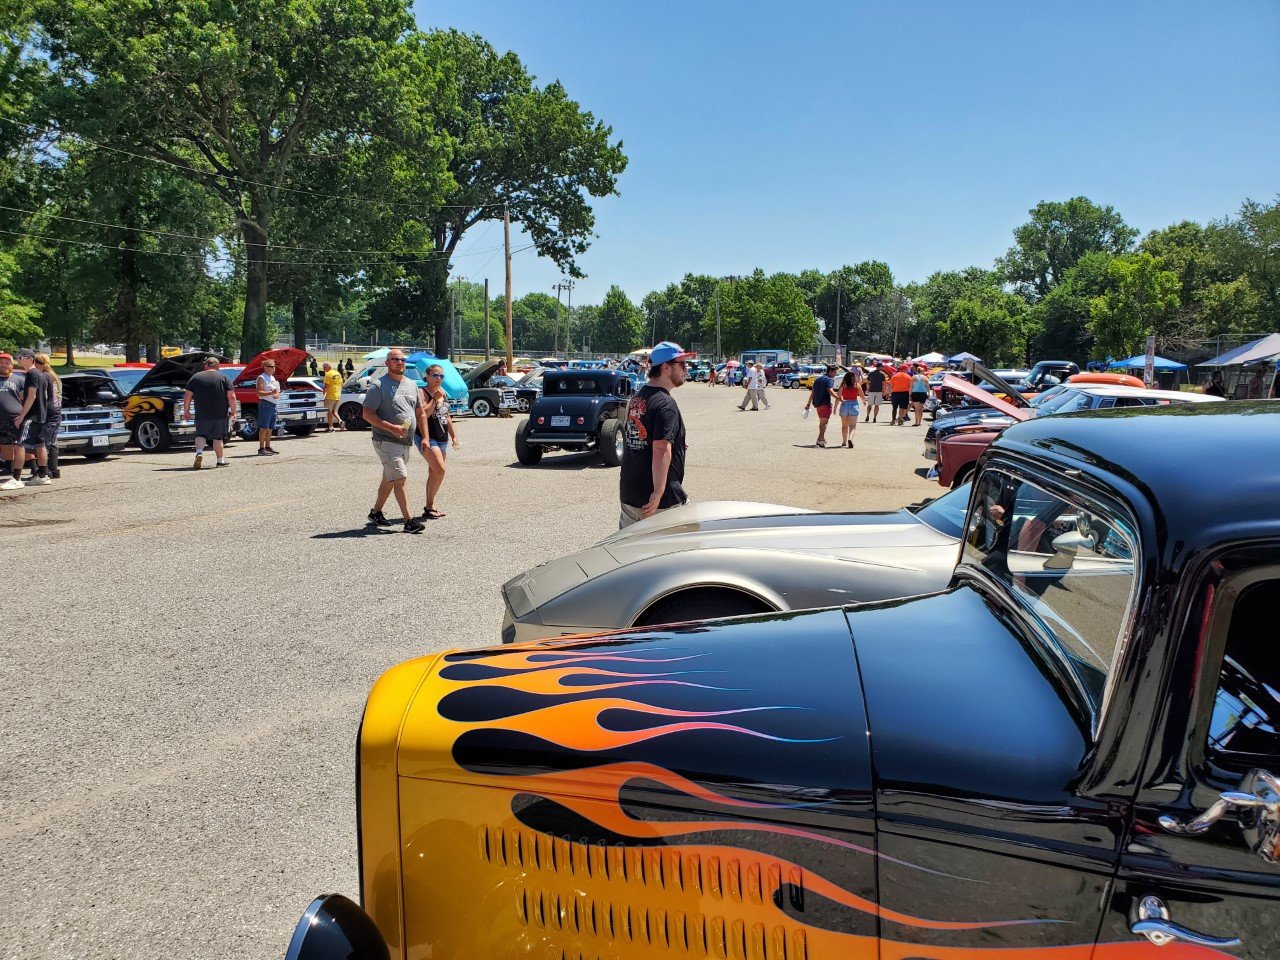 Fourth of July festivities on Monday included a car show near the baseball fields at Lincoln Park.